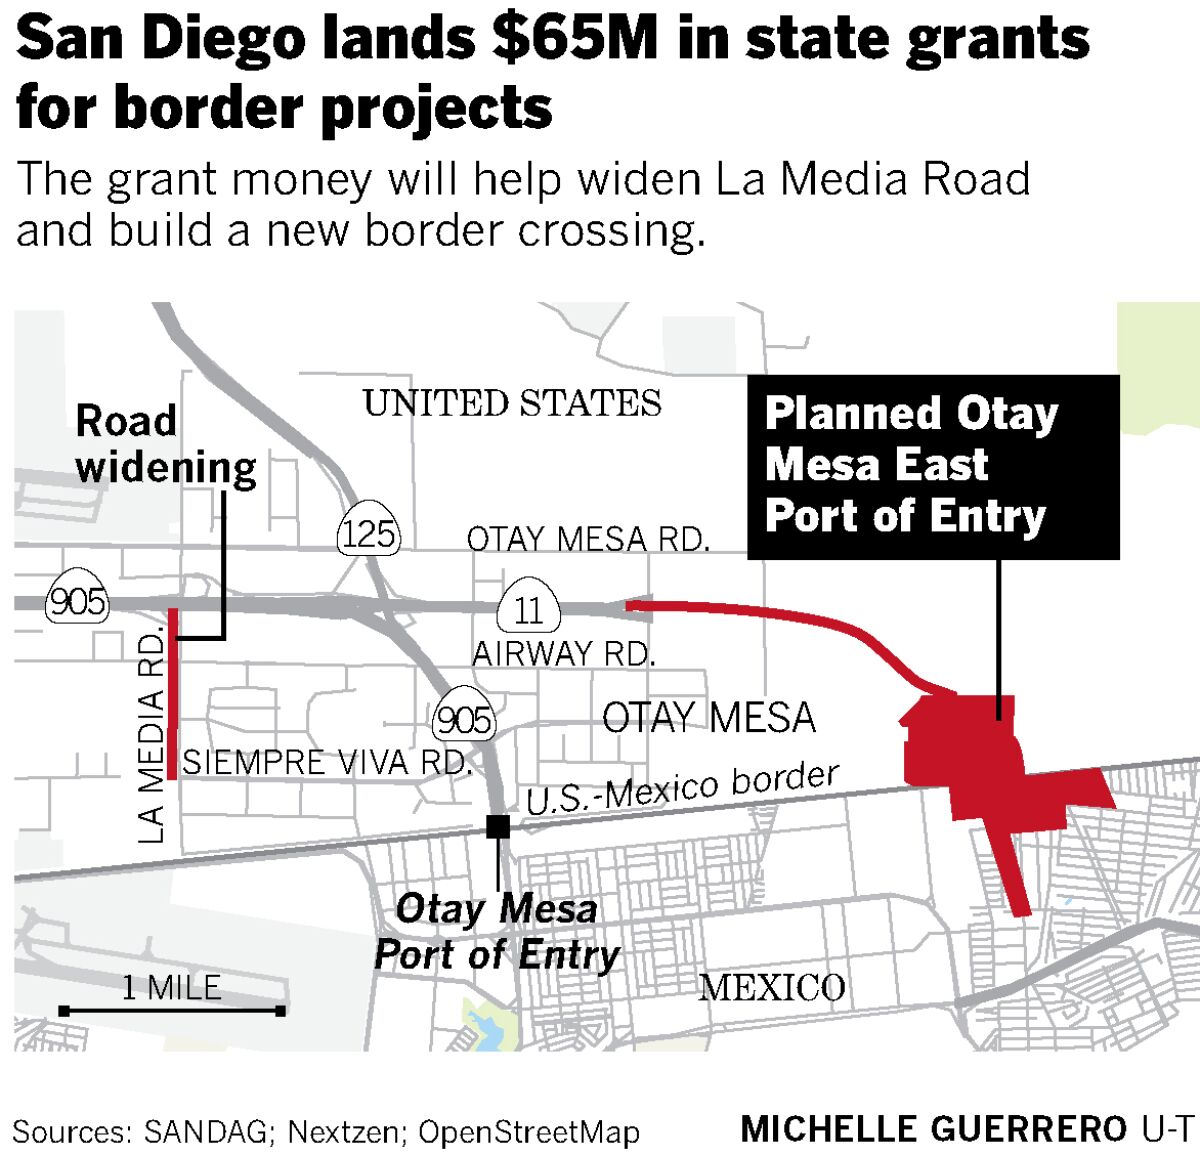 San Diego lands $65M in state grantsfor border projects